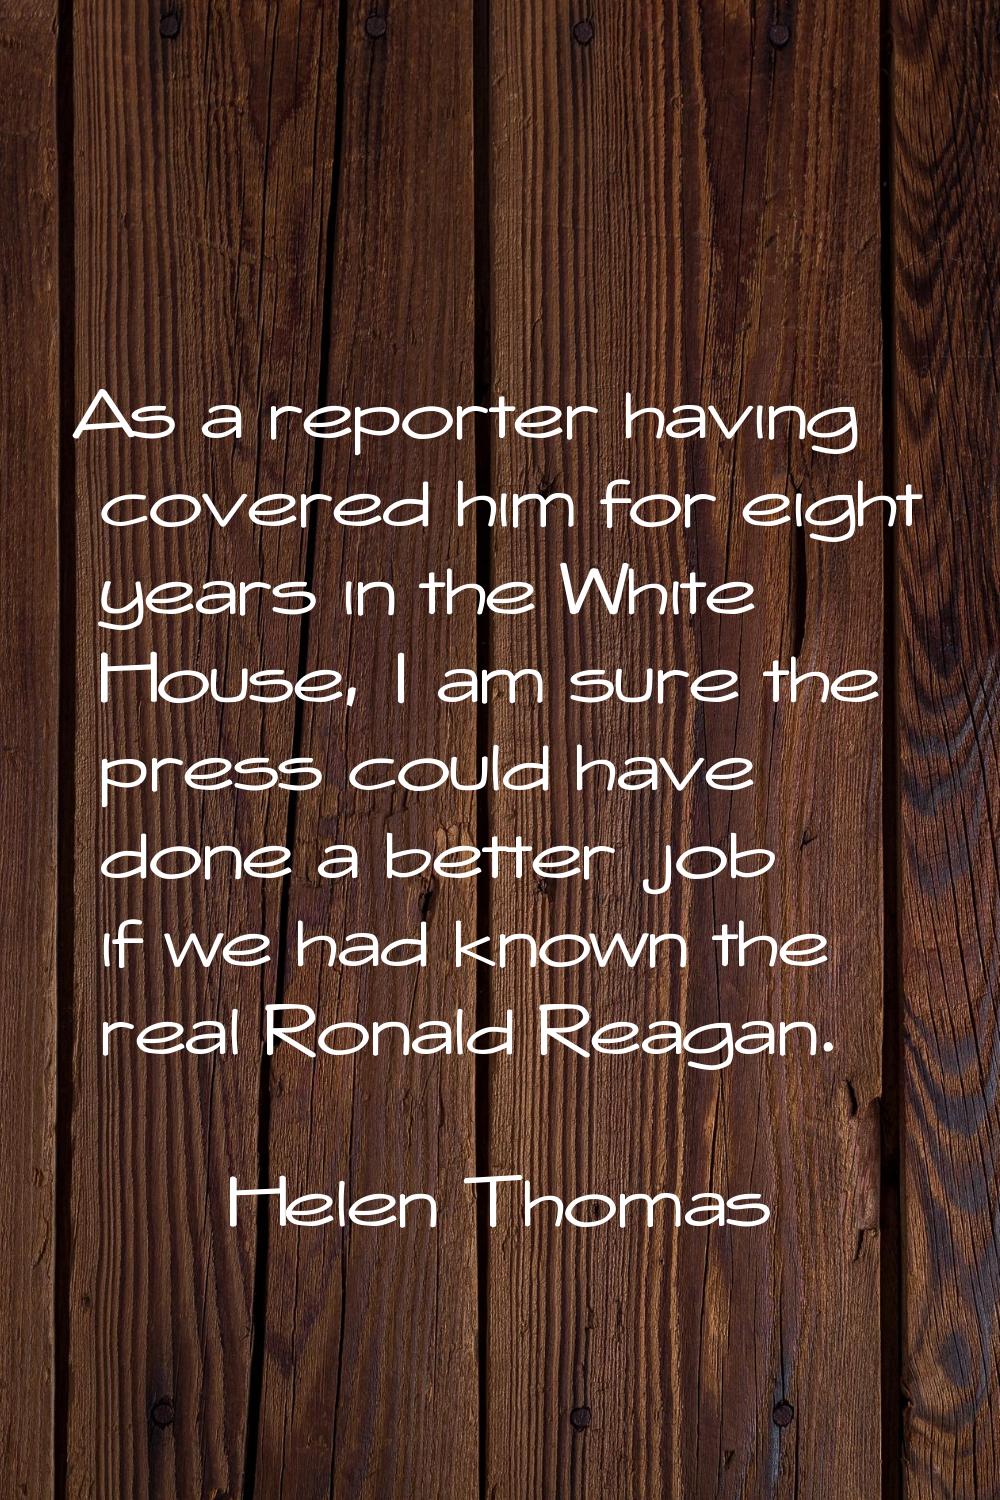 As a reporter having covered him for eight years in the White House, I am sure the press could have